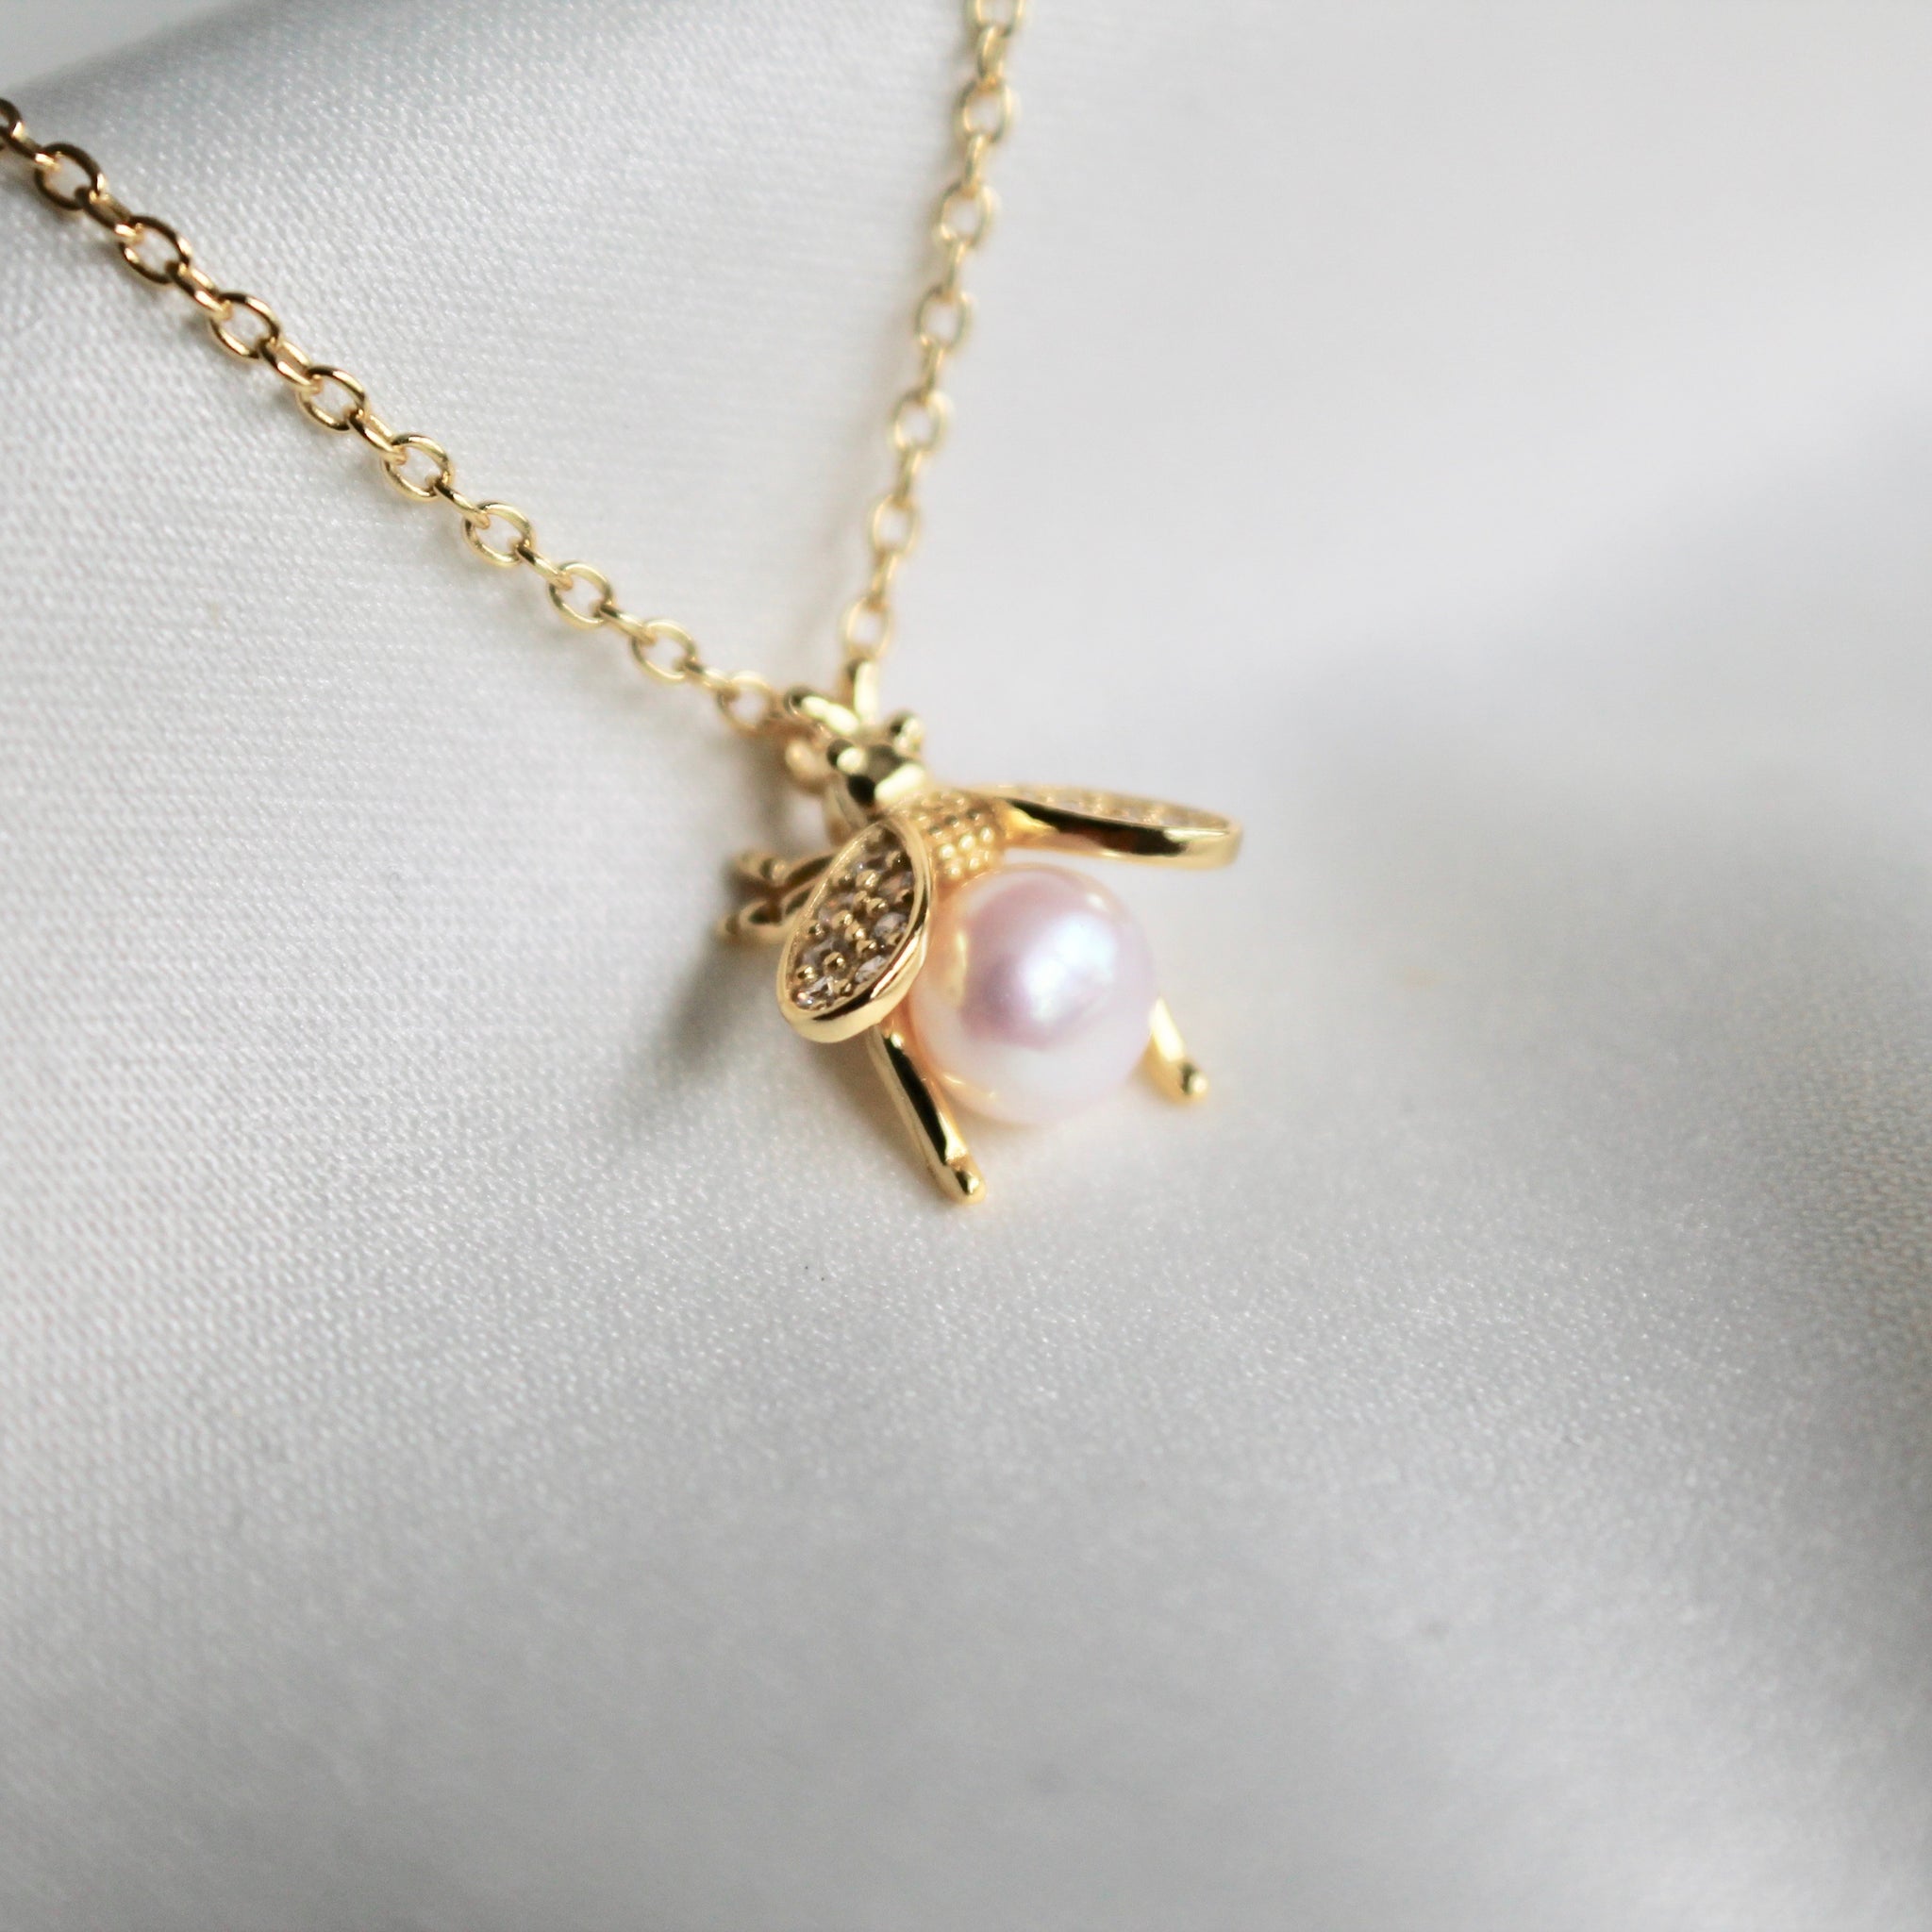 Bumble bee pearl necklace